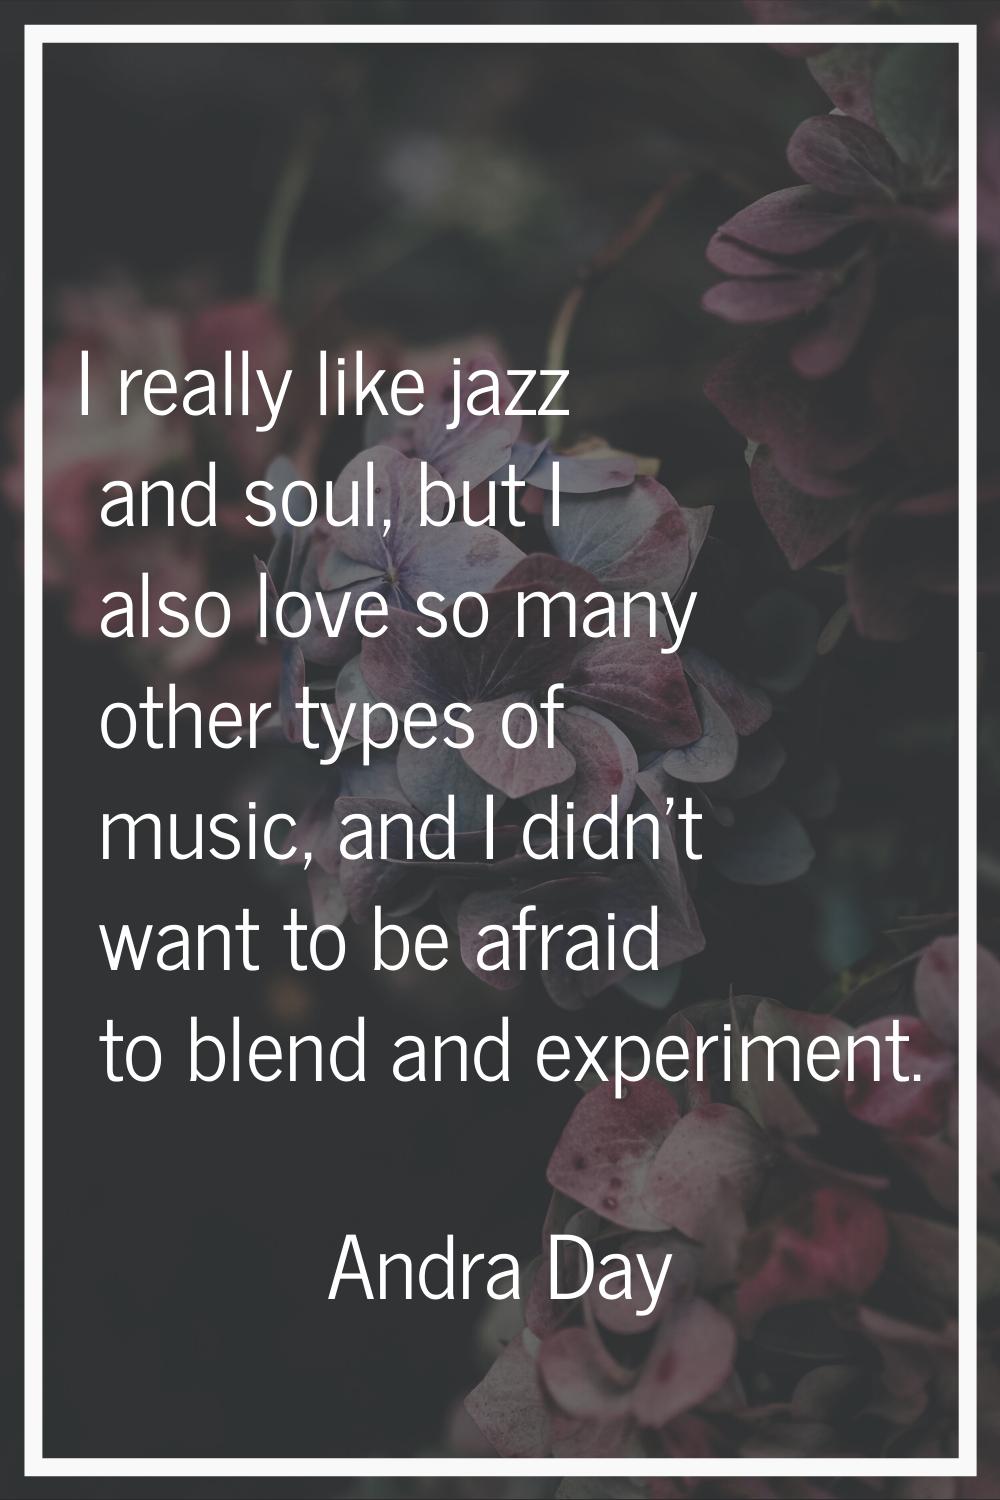 I really like jazz and soul, but I also love so many other types of music, and I didn't want to be 